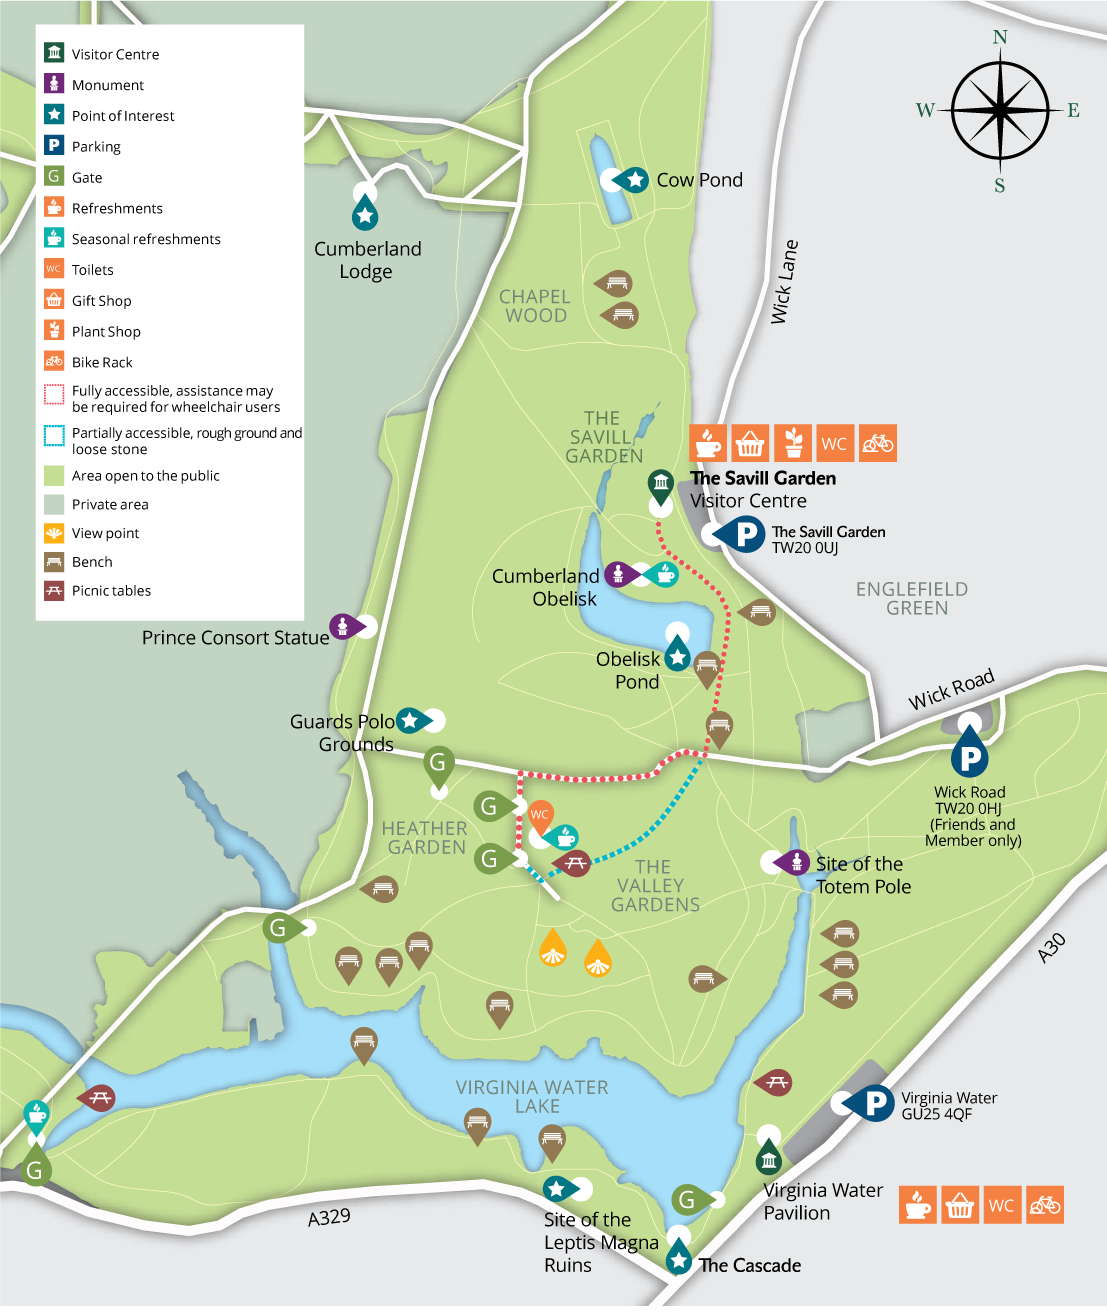 A walking route map from The Savill Garden to The Valley Gardens.